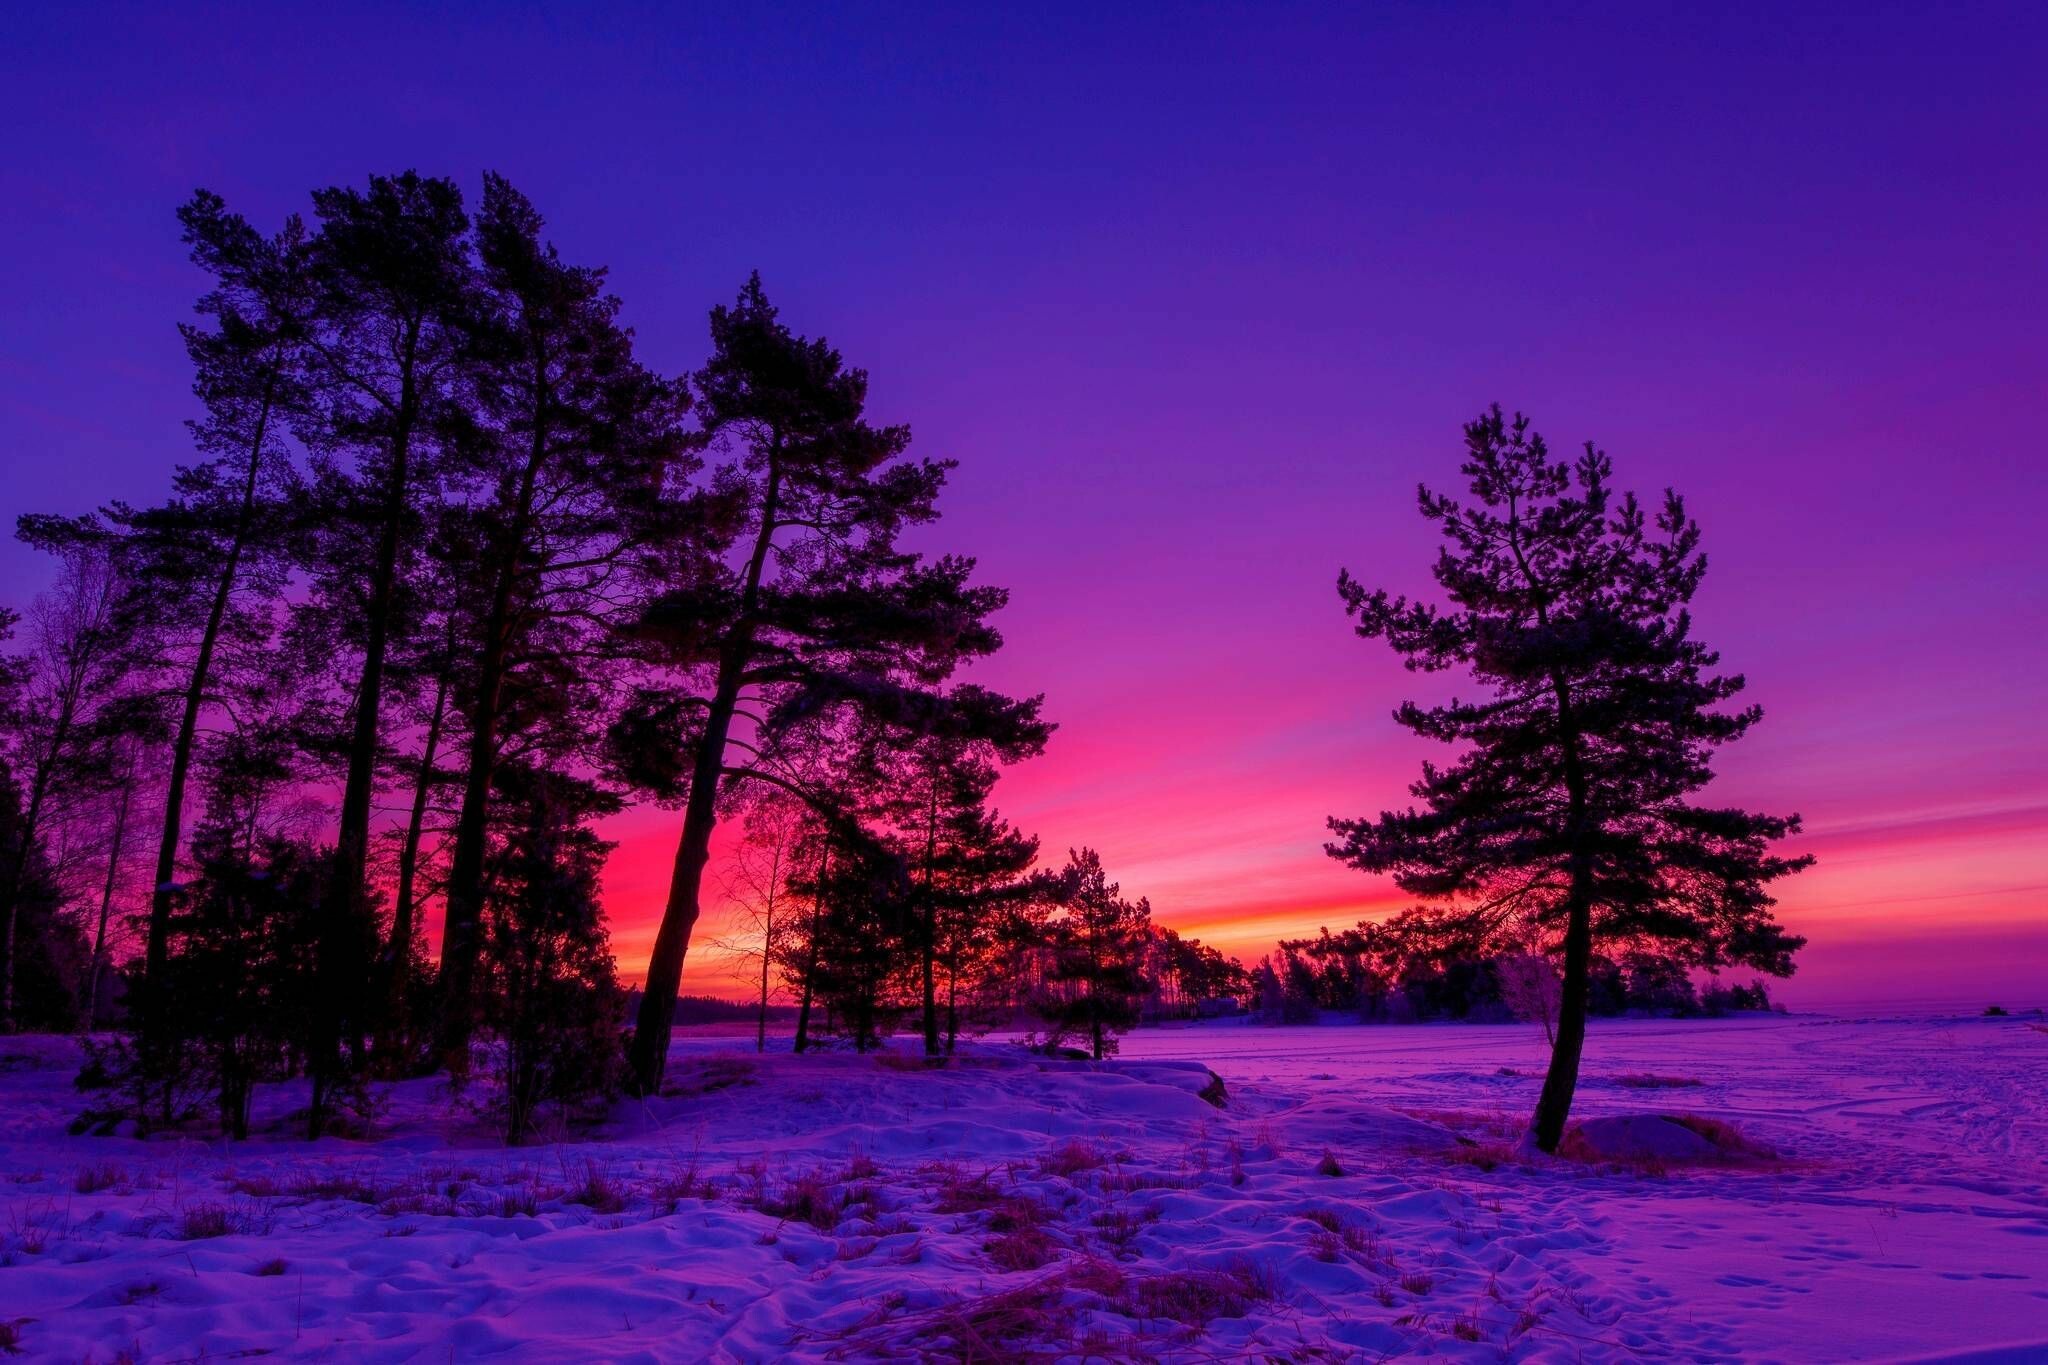 Sunset: Winter evening, The time when the sun goes below the horizon in the evening. 2050x1370 HD Wallpaper.